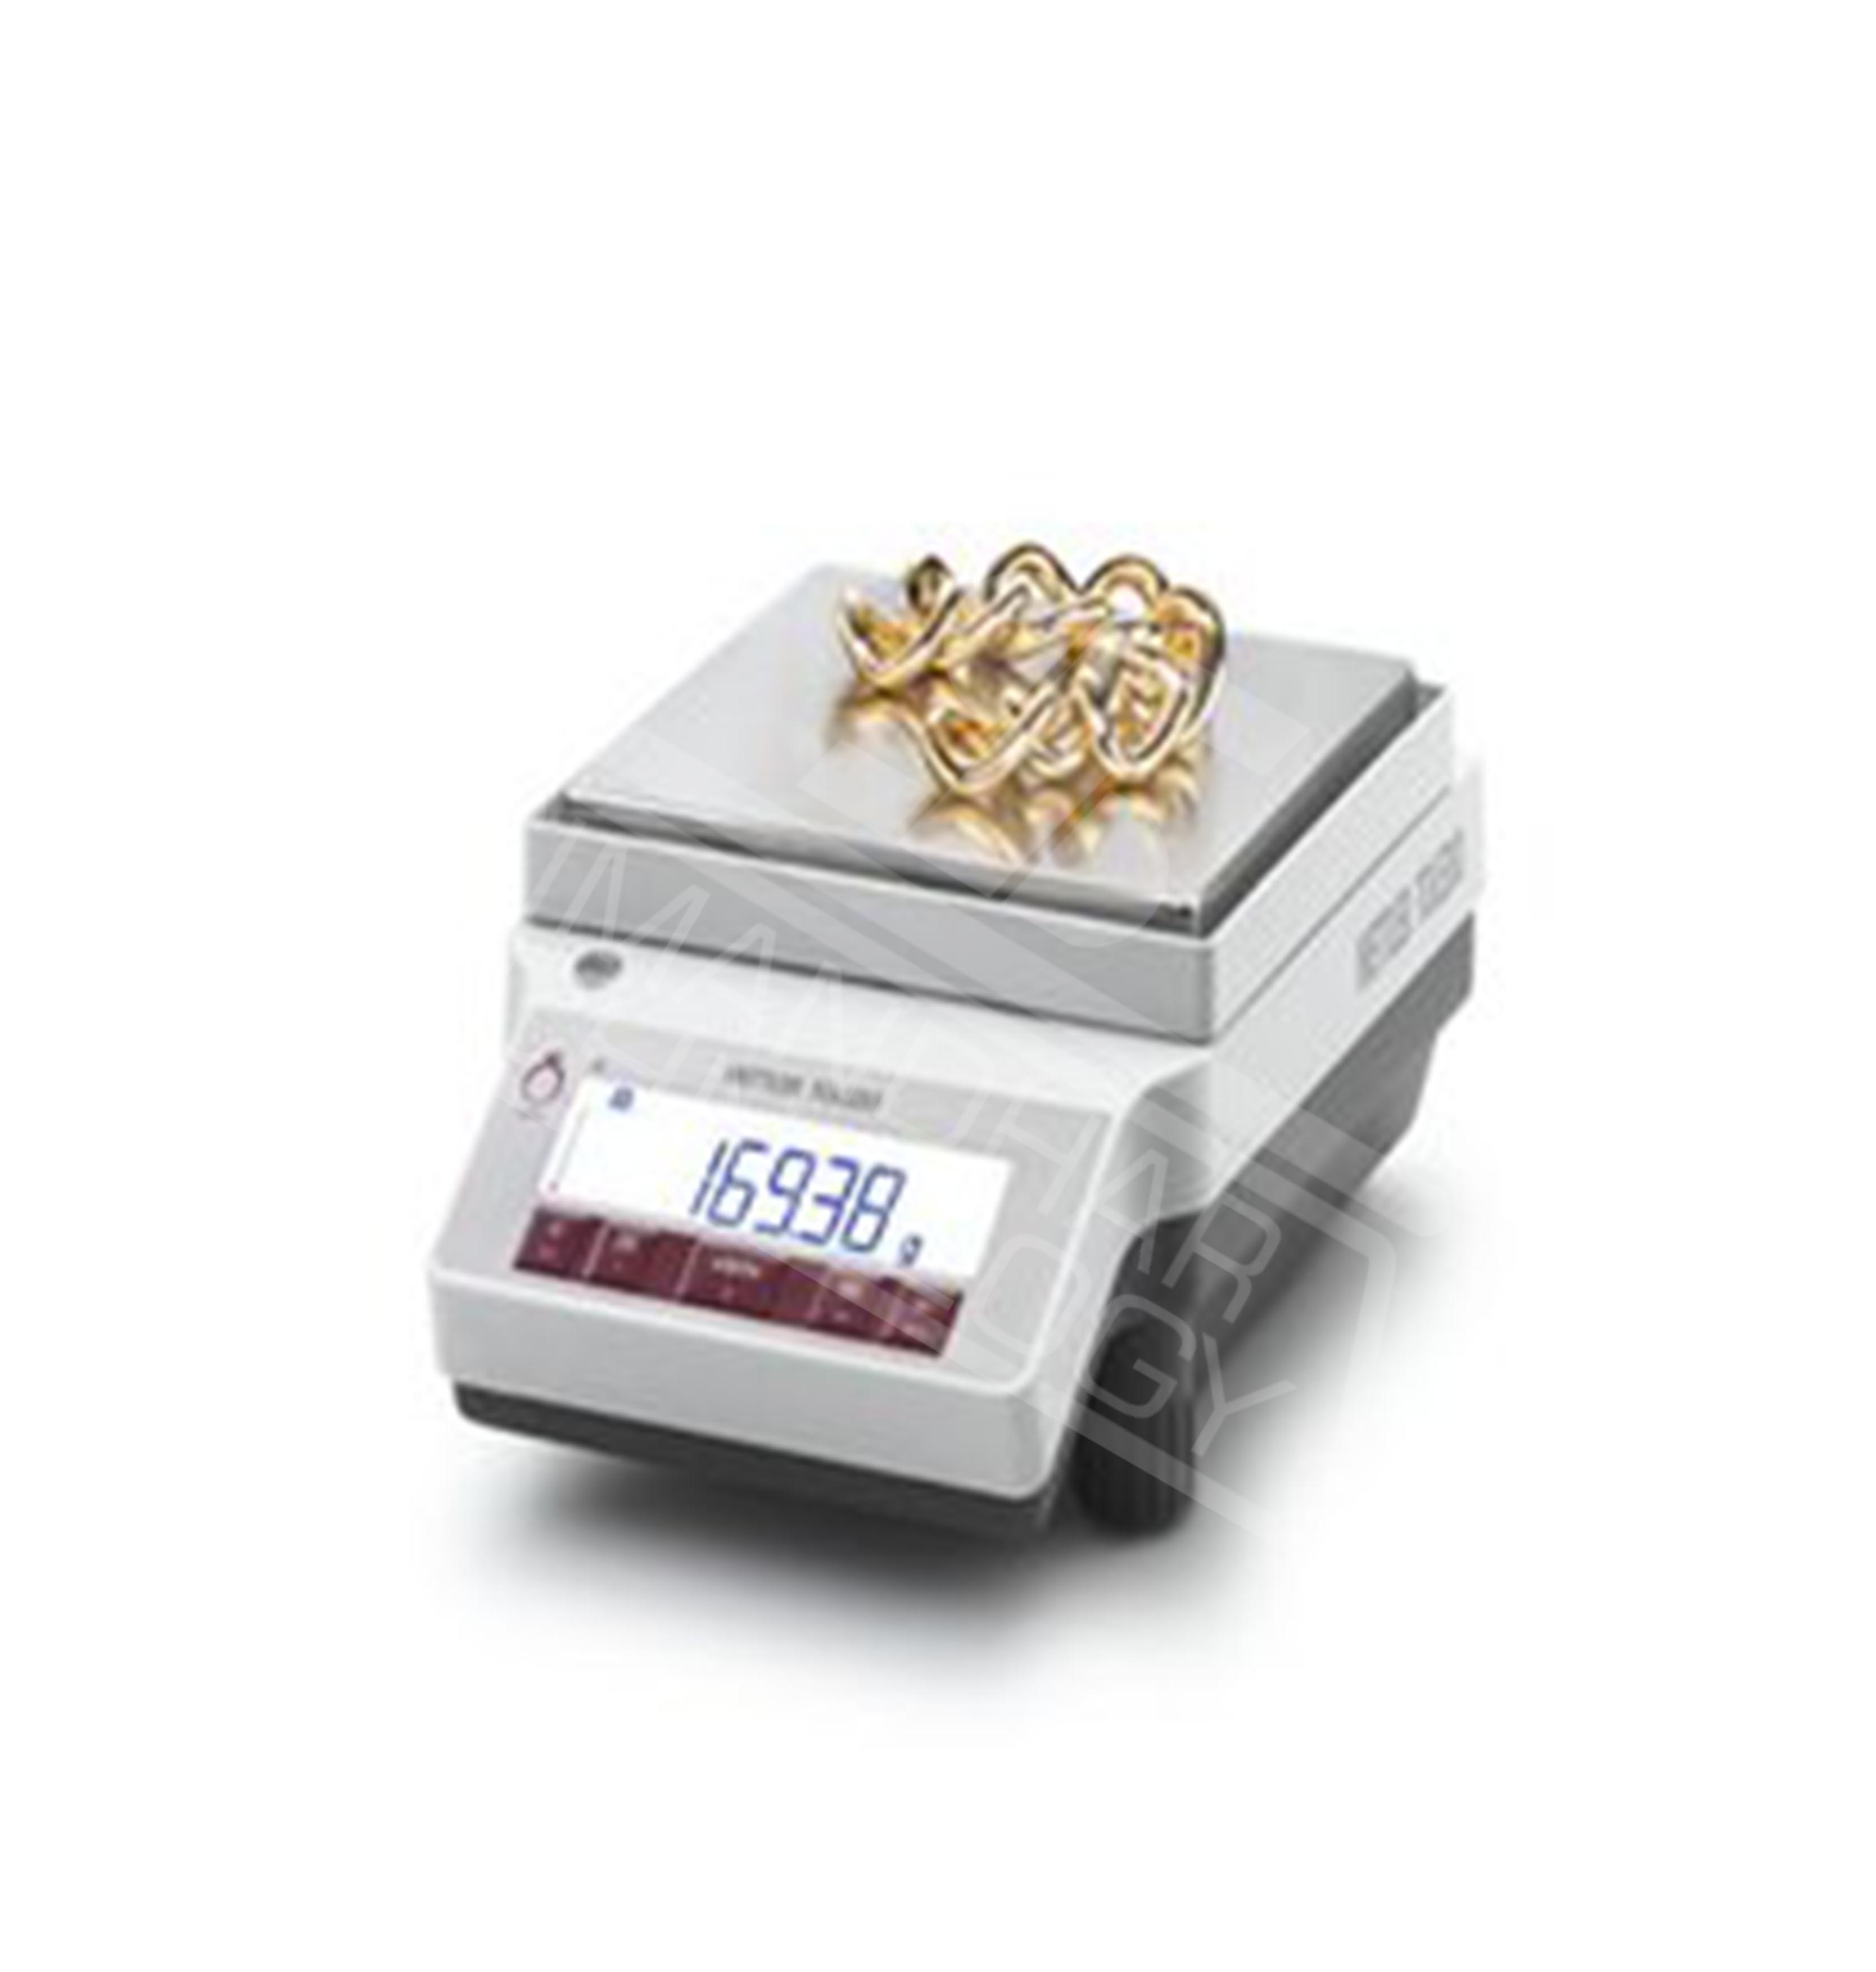 Jewellery Weighing Scale Manufacturer in Haryana